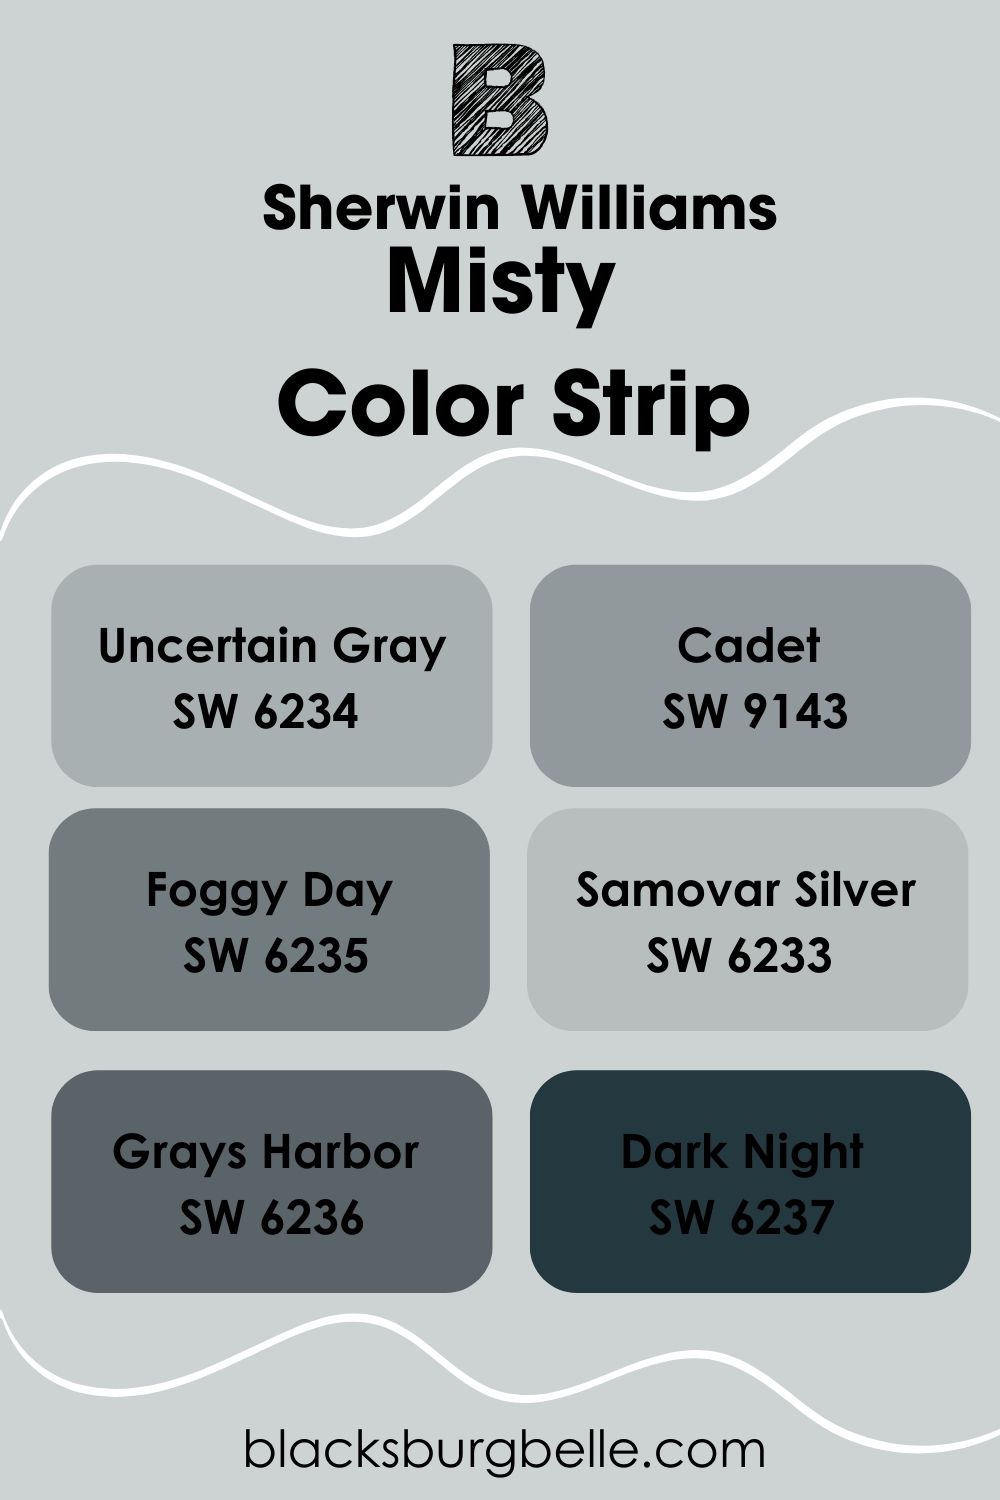 The misty glade color comparison no one asked for 😂 From L to R